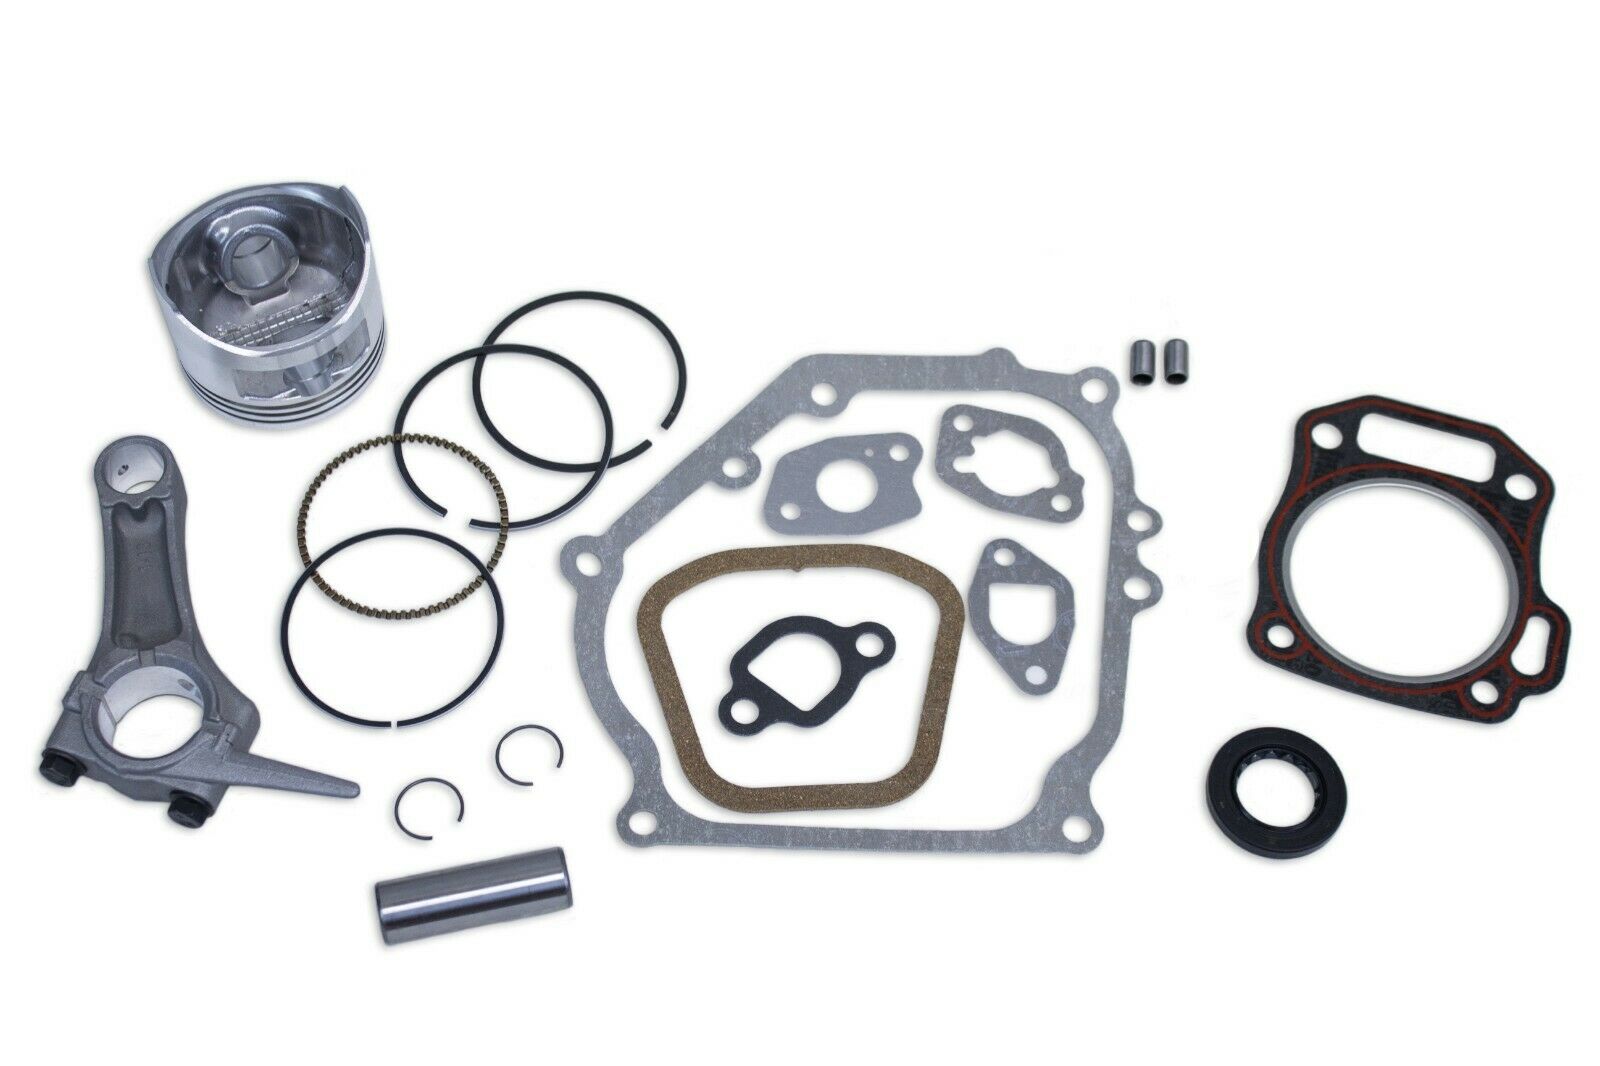 Top end rebuild kit for Honda GX200 6.5HP with piston kit, connecting rod, gasket kit and low oil sensor